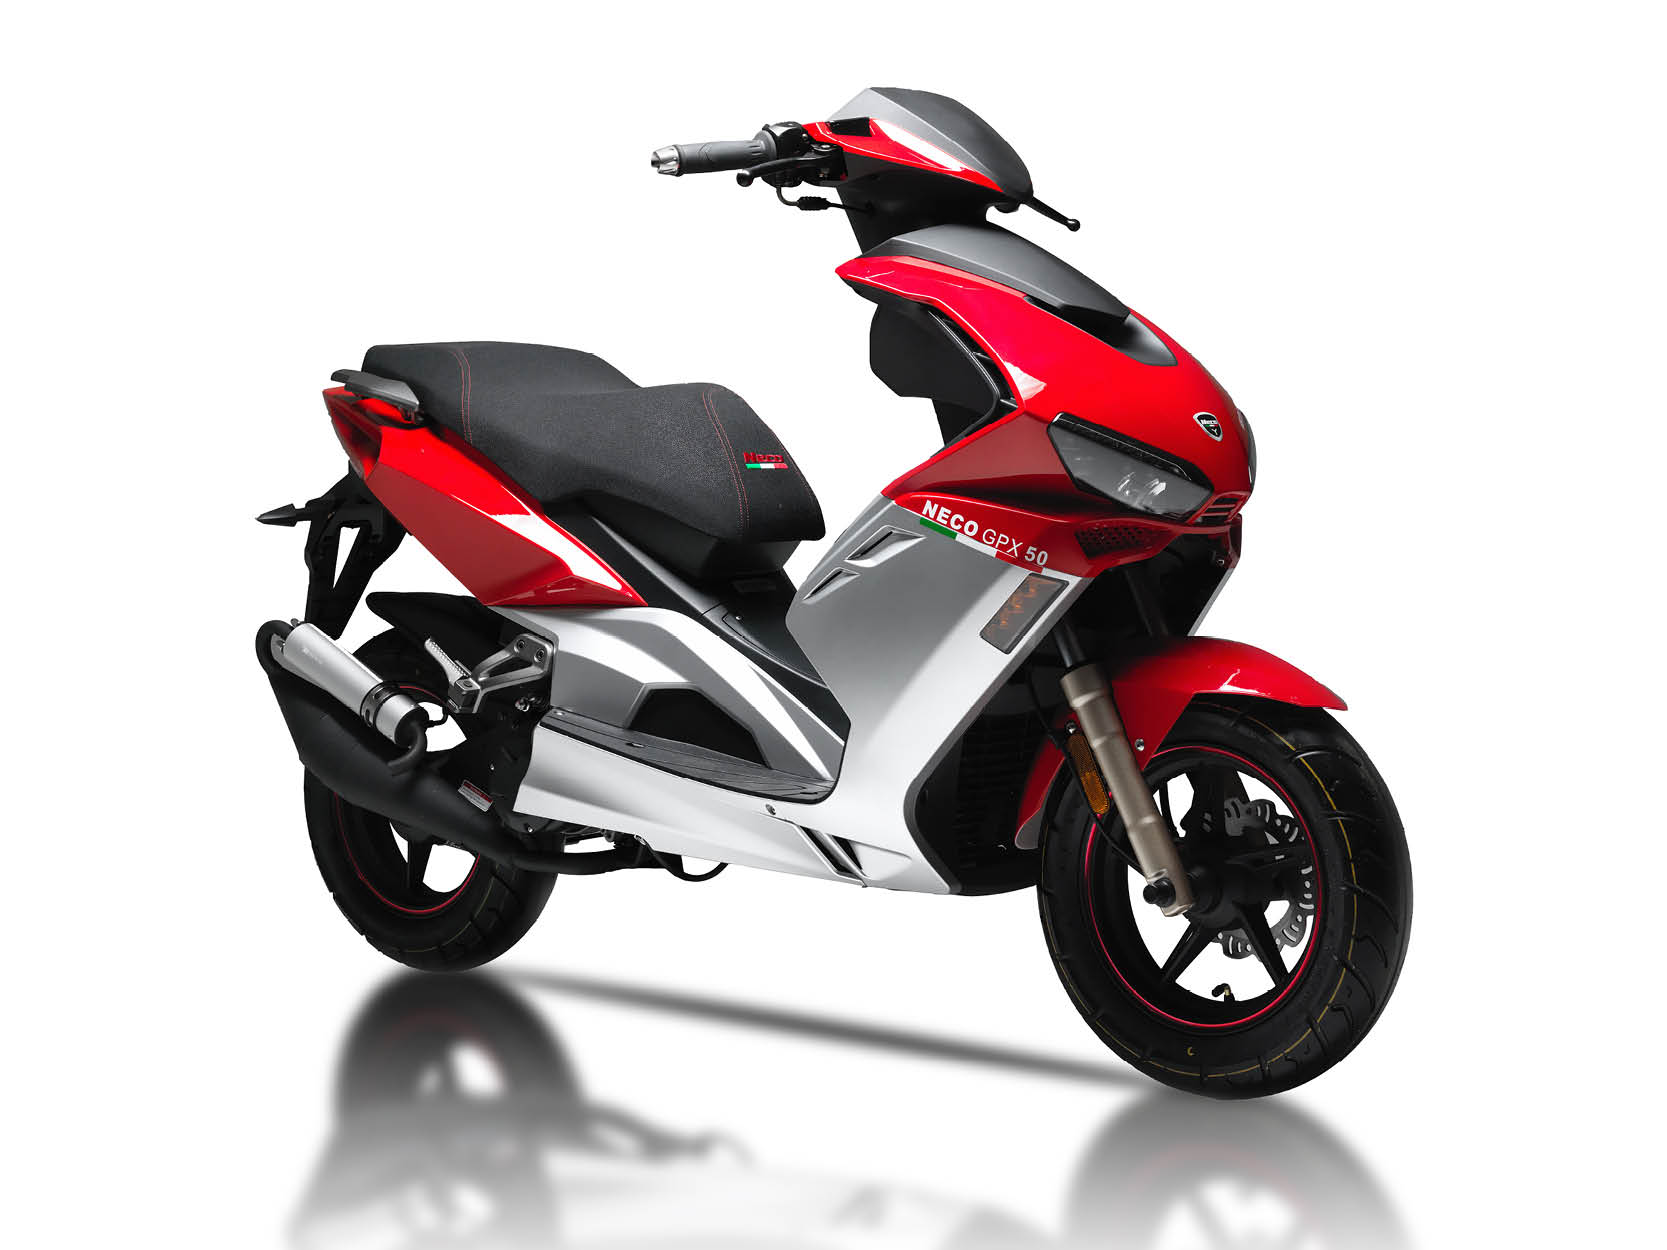 Neco GPX 50cc Euro 4 Finance Available - The Scooter Warehouse